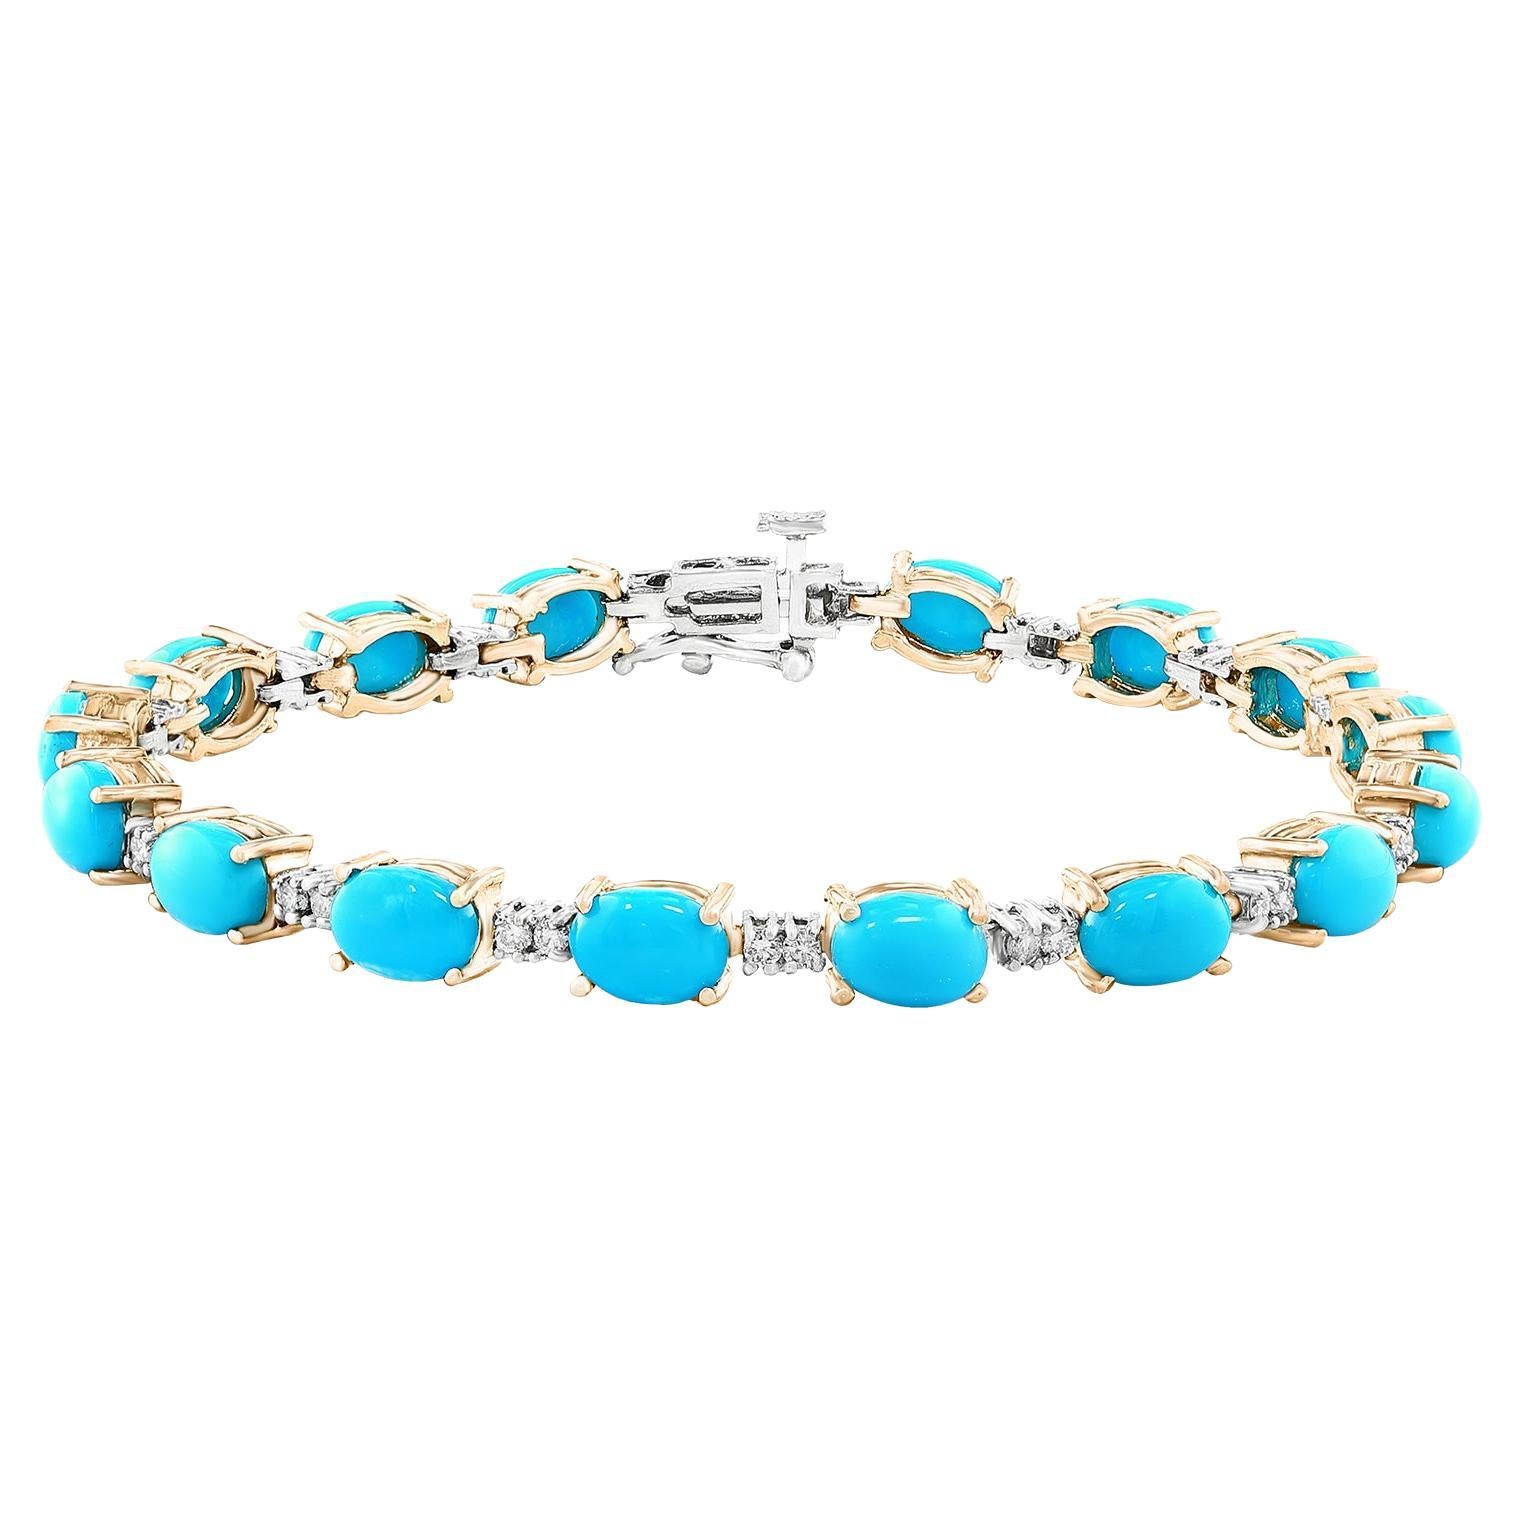 Rare and classic 8 Ct Natural Sleeping Beauty Turquoise & Diamond Tennis Bracelet 14 K White Gold
 This exceptionally Rare Tennis  bracelet has  16 stones of oval  Sleeping Beauty  . Each Oval sleeping beauty turquoise is spaced by two diamonds .